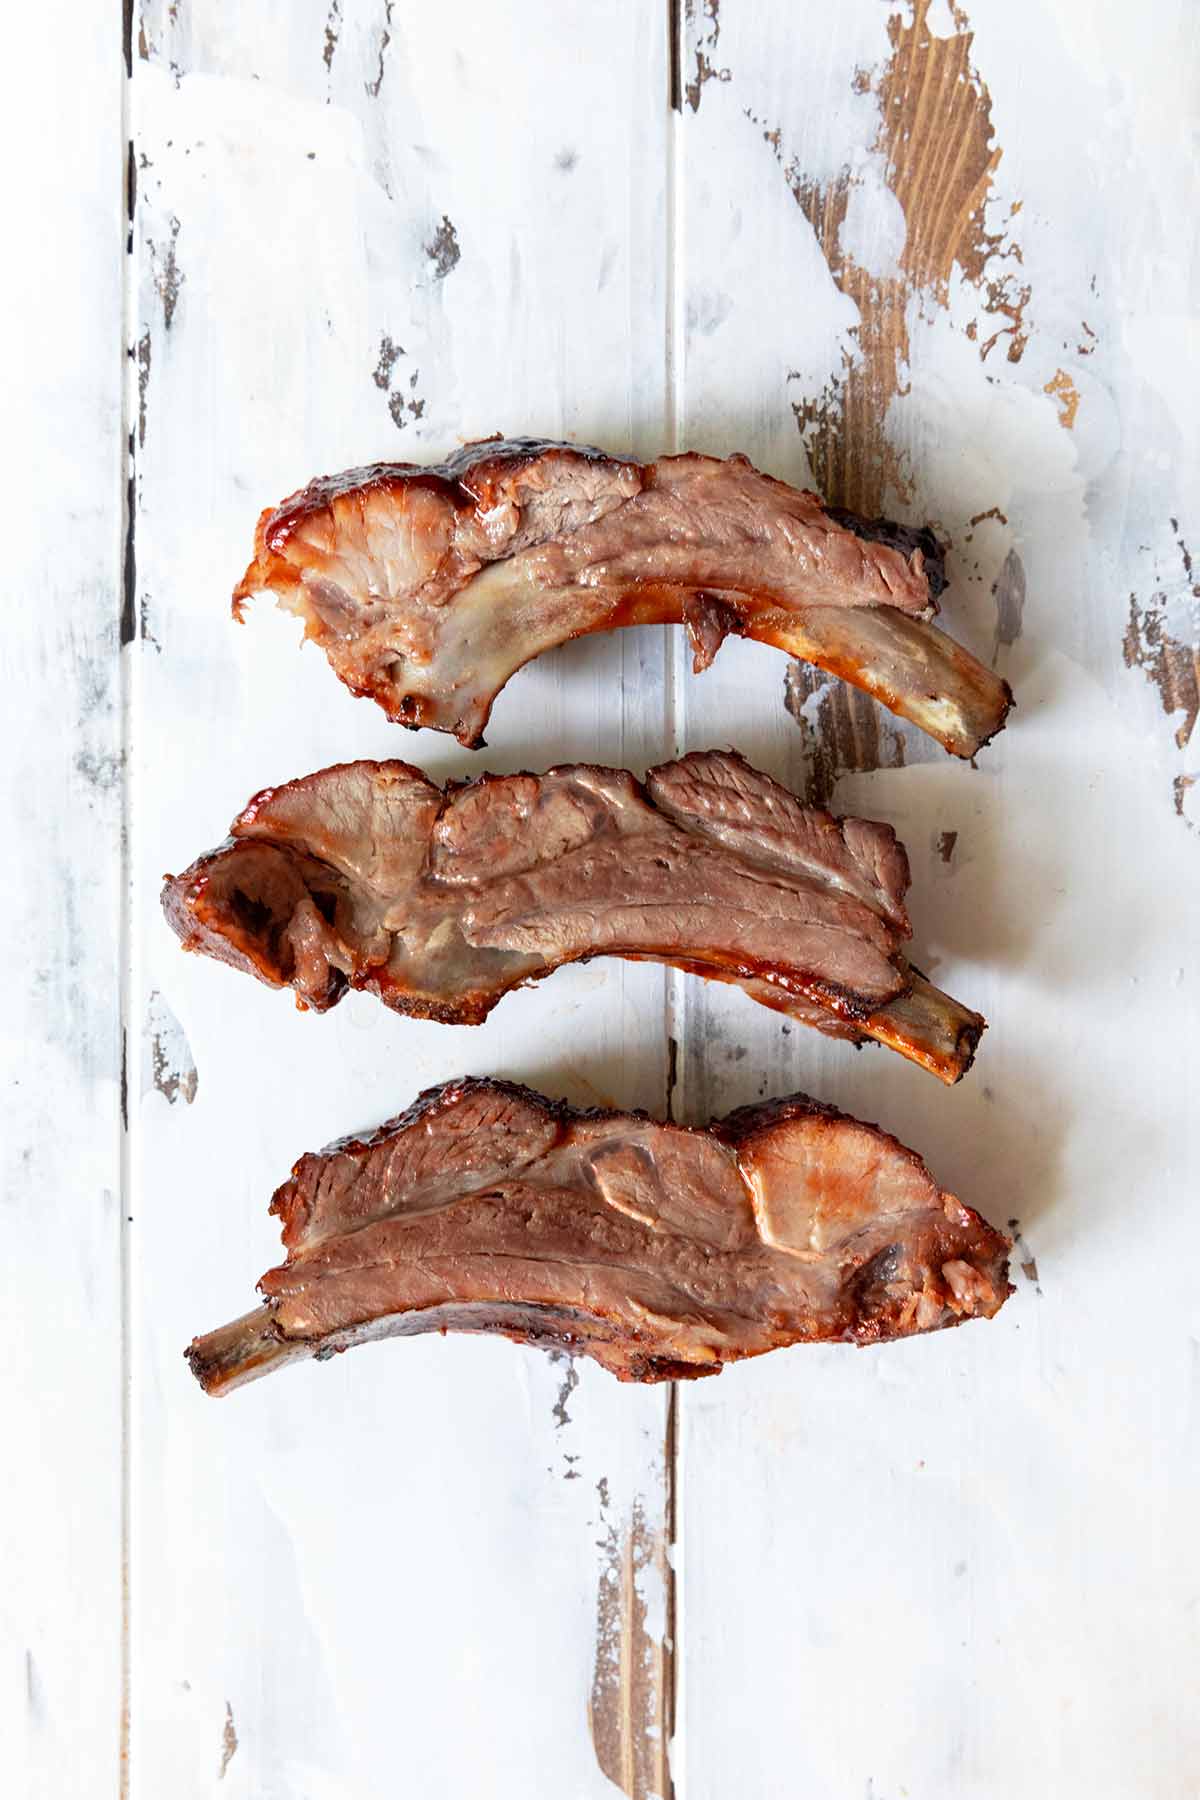 Three baby back ribs on a worn white wooden table.